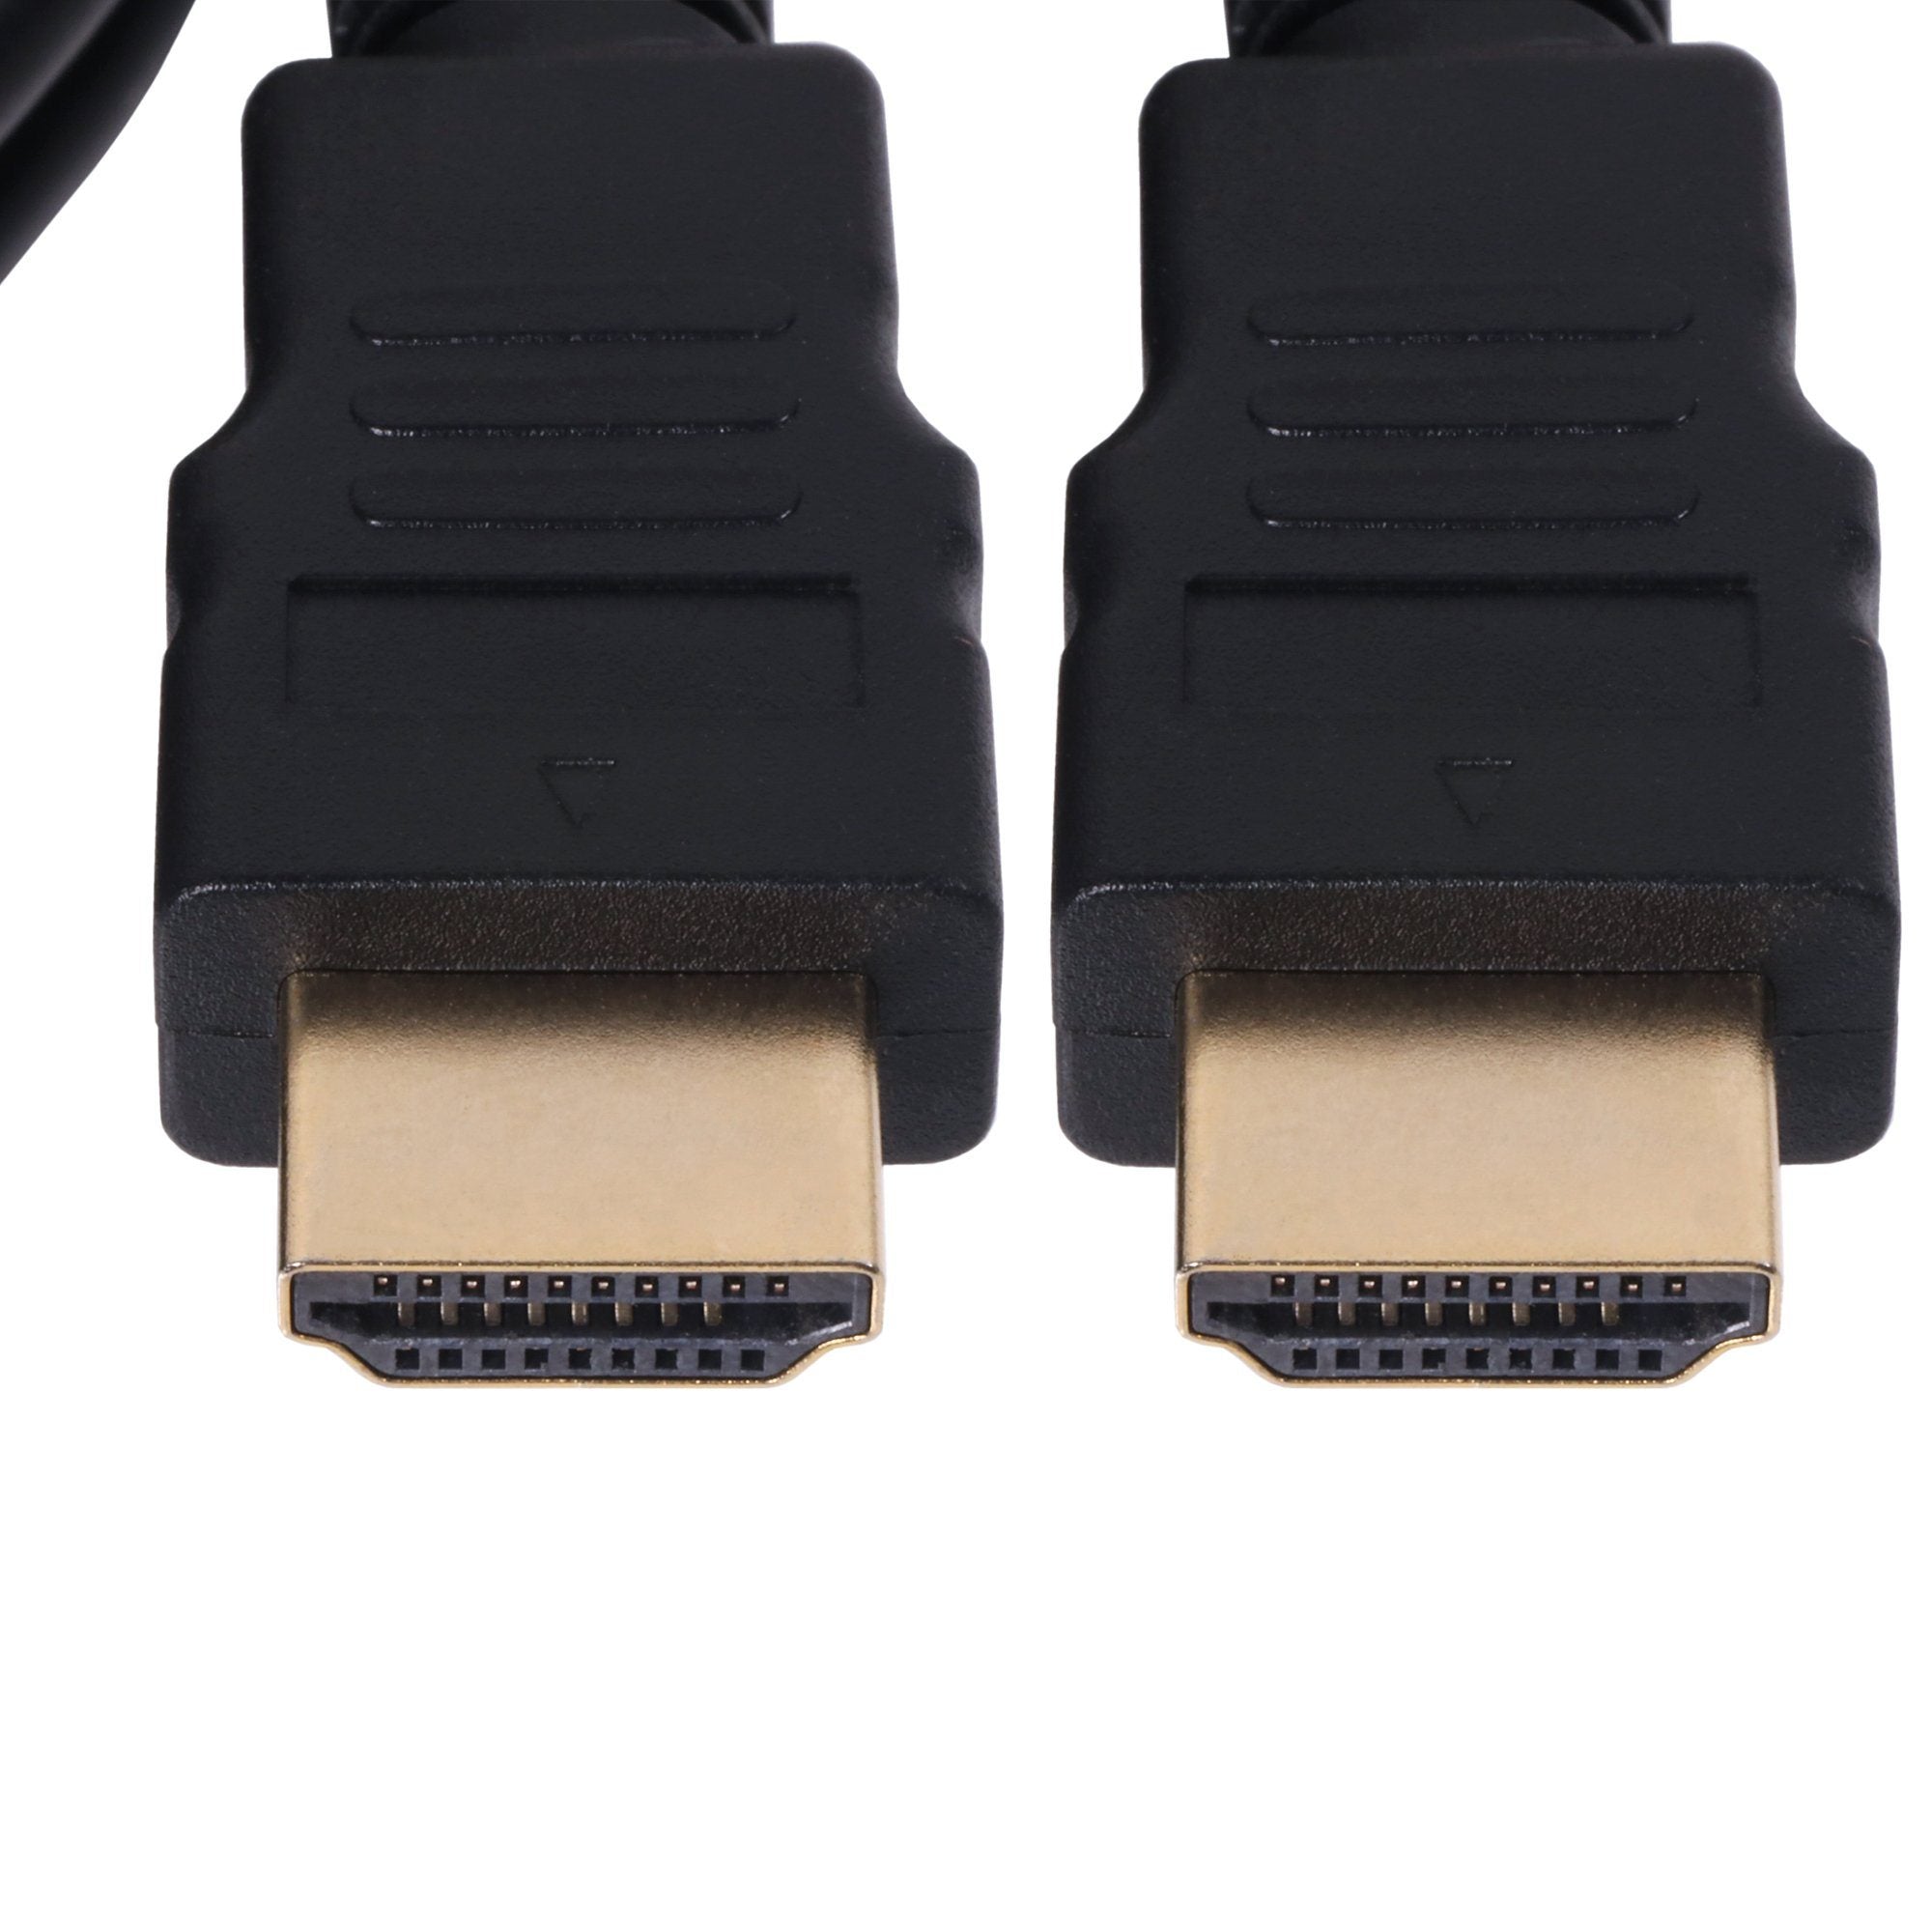 Cable – Hdmi 7m 4k - CorporateMall